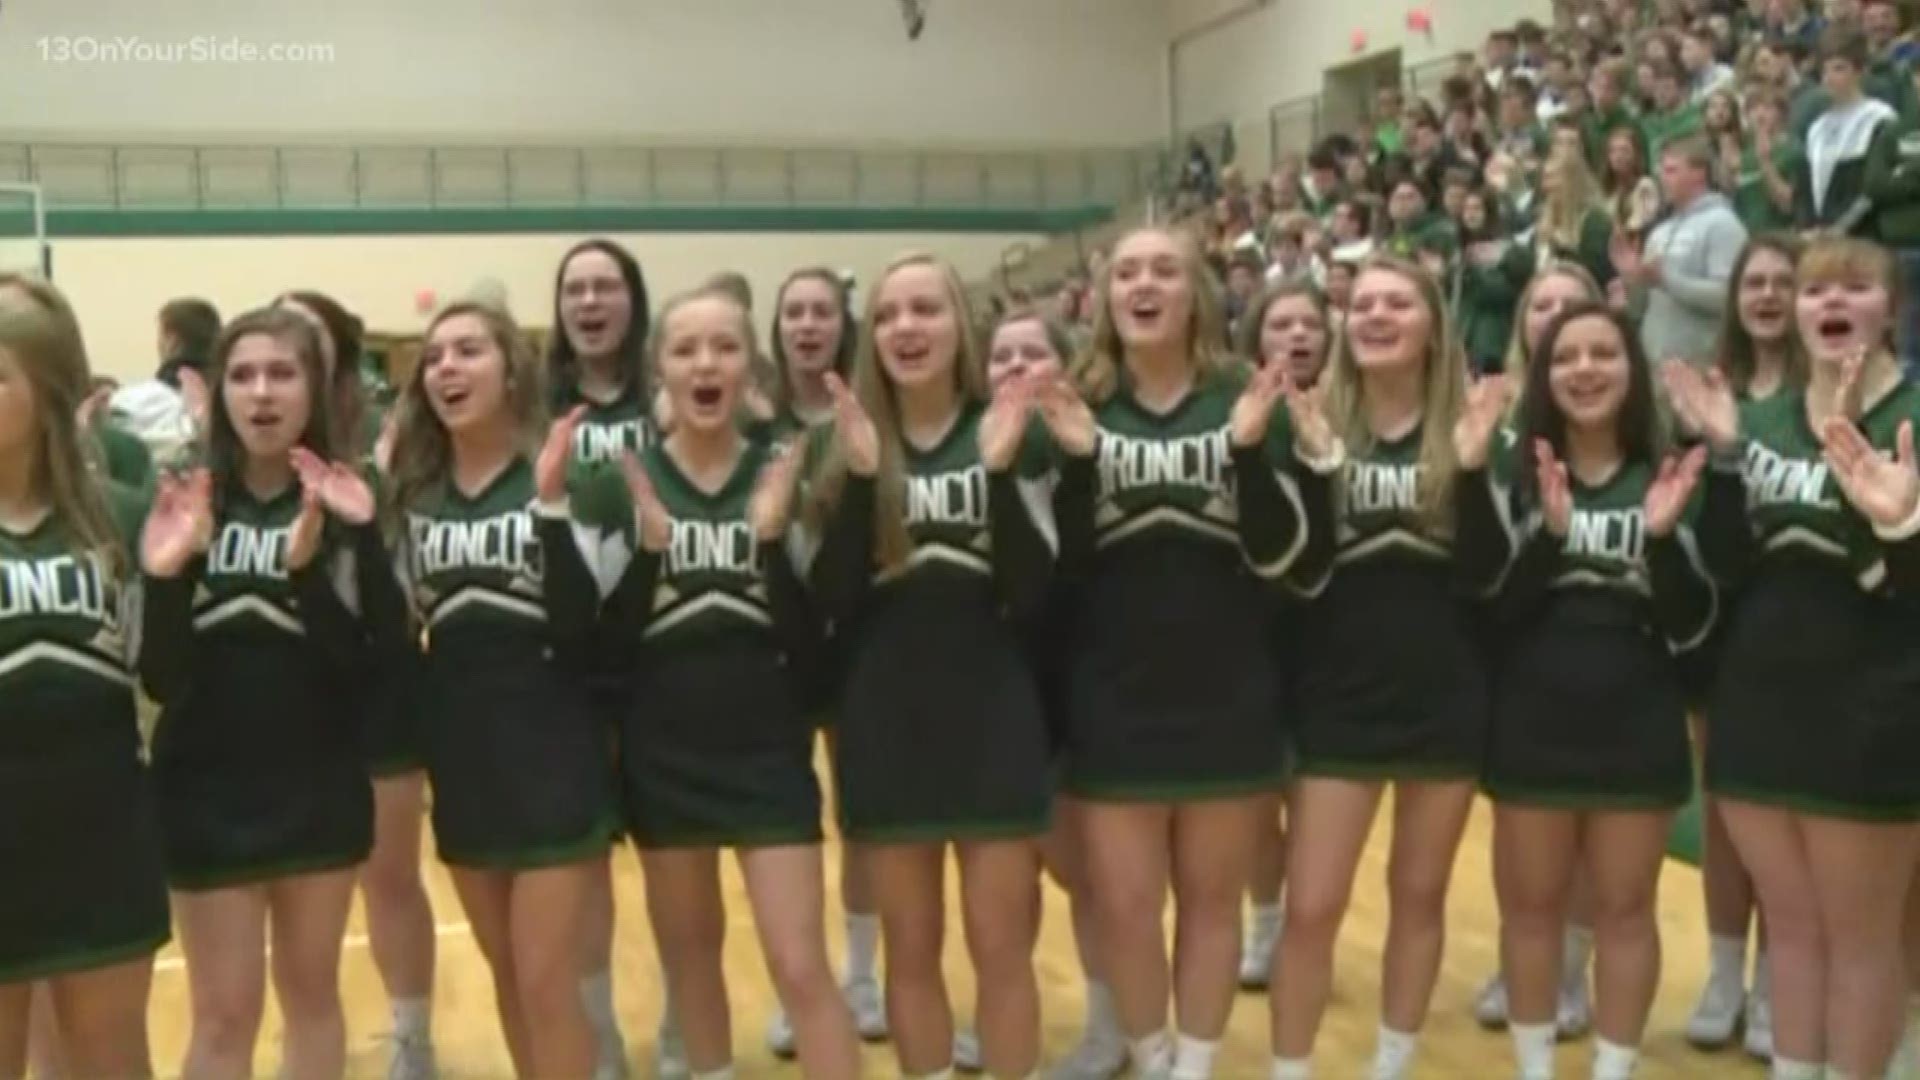 The Coopersville Cheer team kept the students pumped up all morning long!